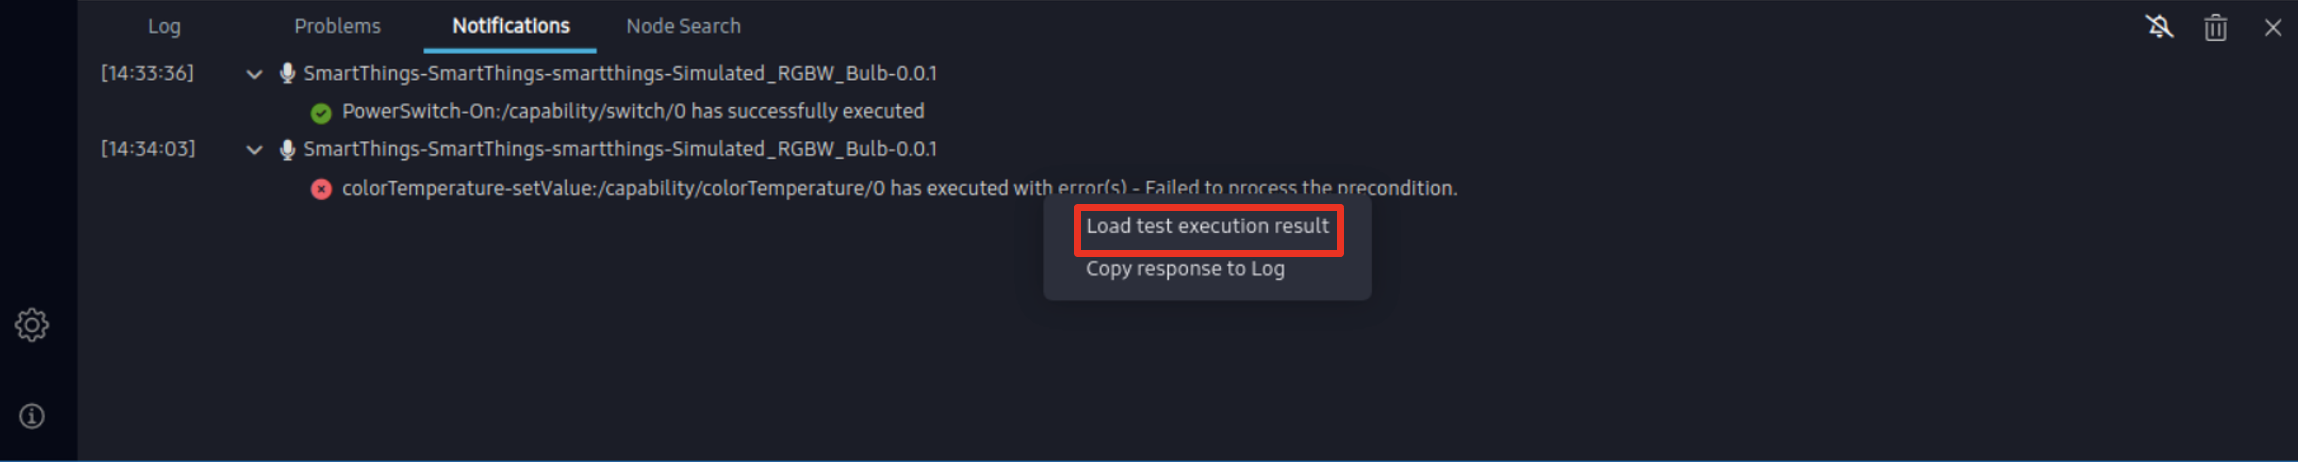 Load execution results for debugging failed execution